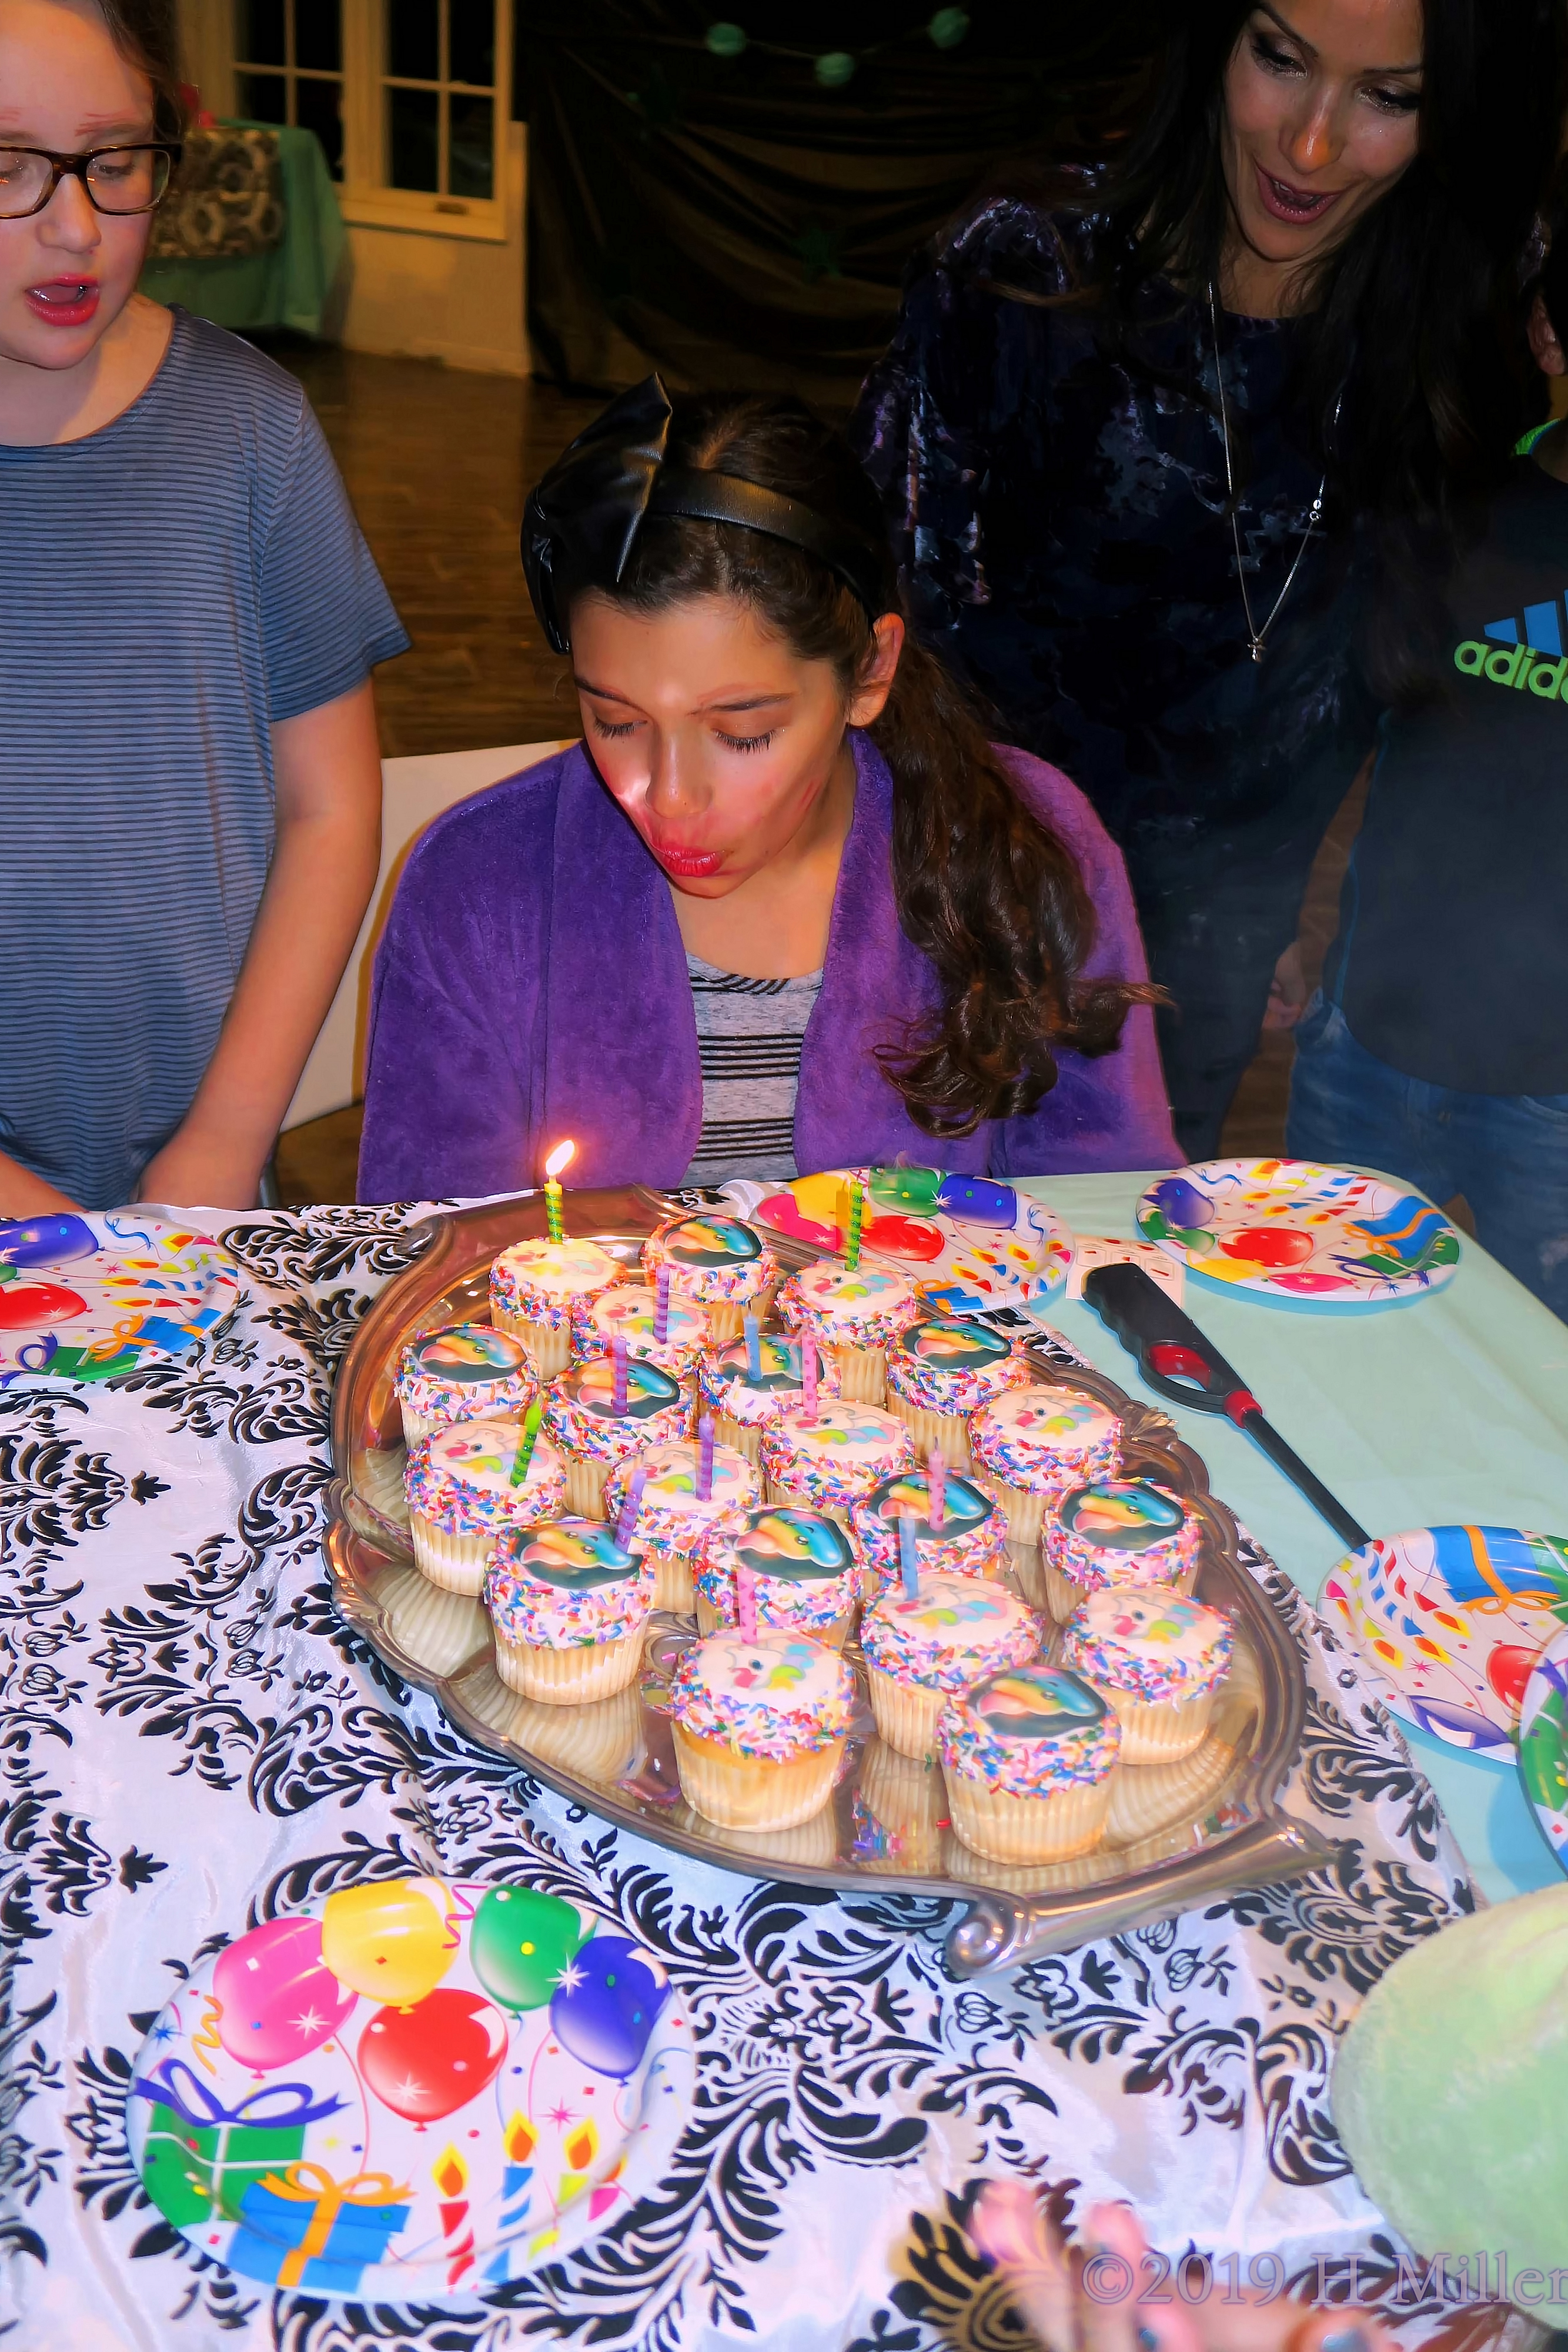 Nowhere I'd Rather Be! Blowing Out Candles On Birthday Cupcakes! 4